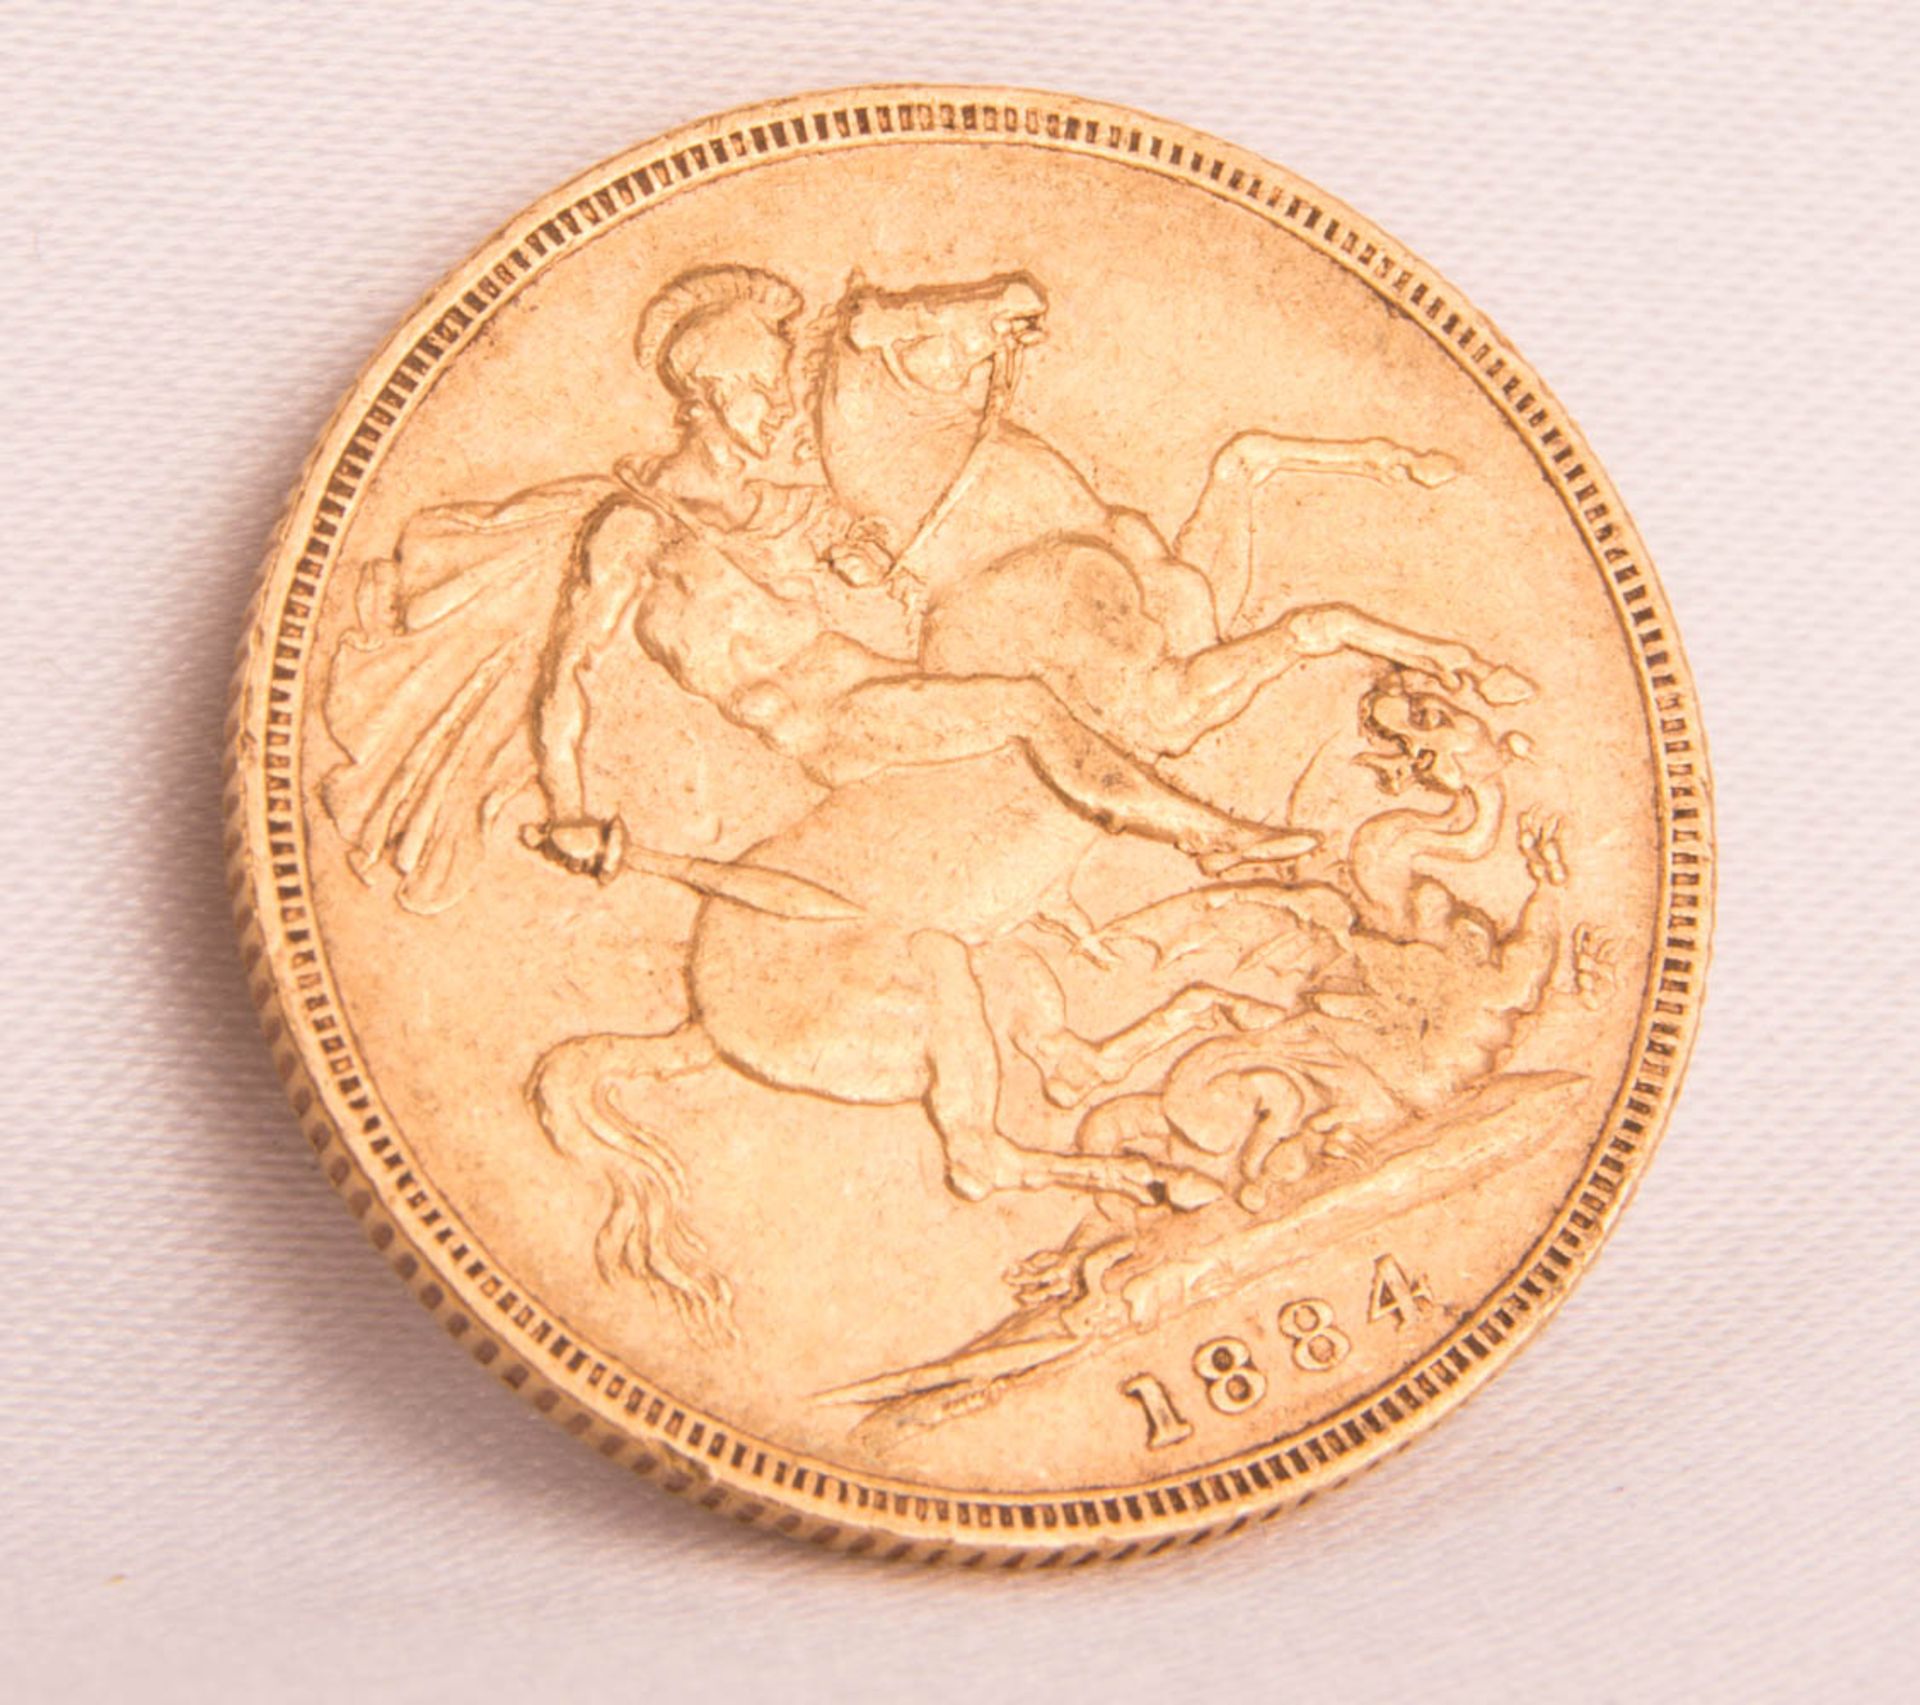 Gold Coin Australien Sovereign 1884 M,Victoria. - Image 2 of 3